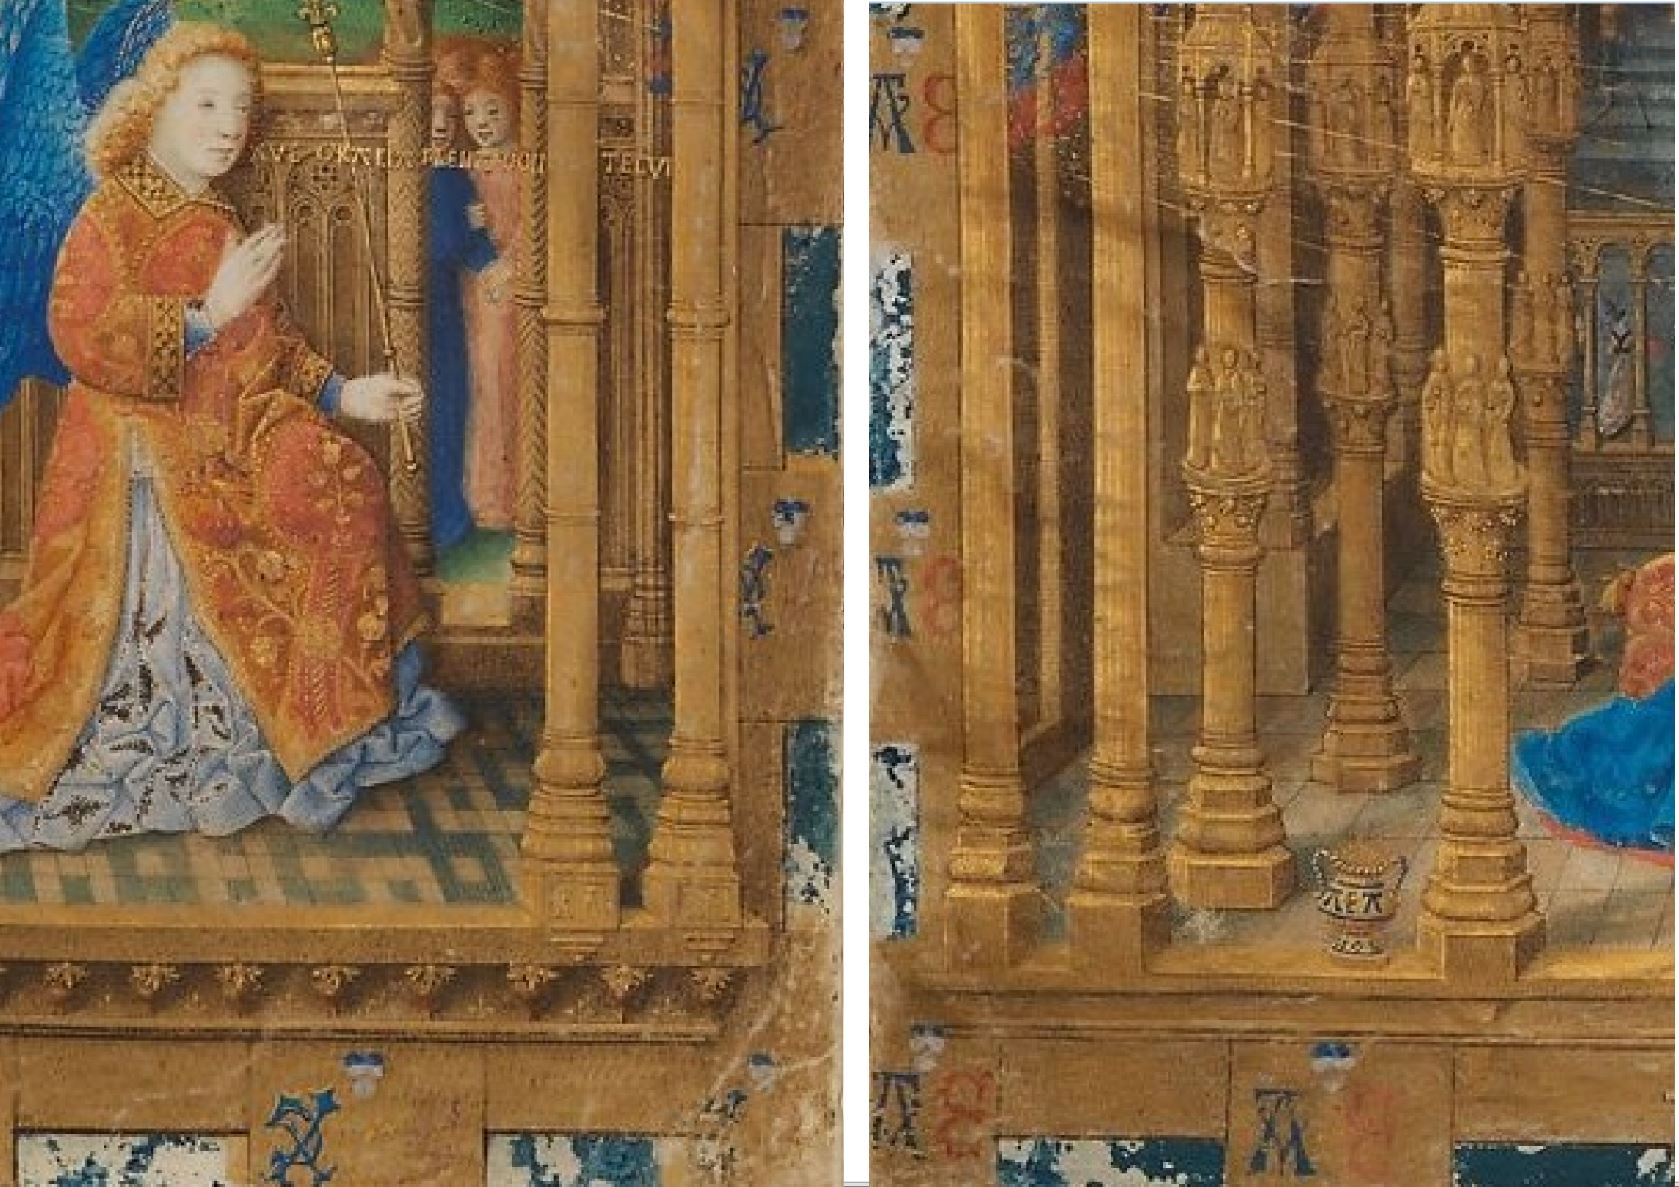 Master of Charles of France 1465 Annunciation Hours of Charles of France MET details